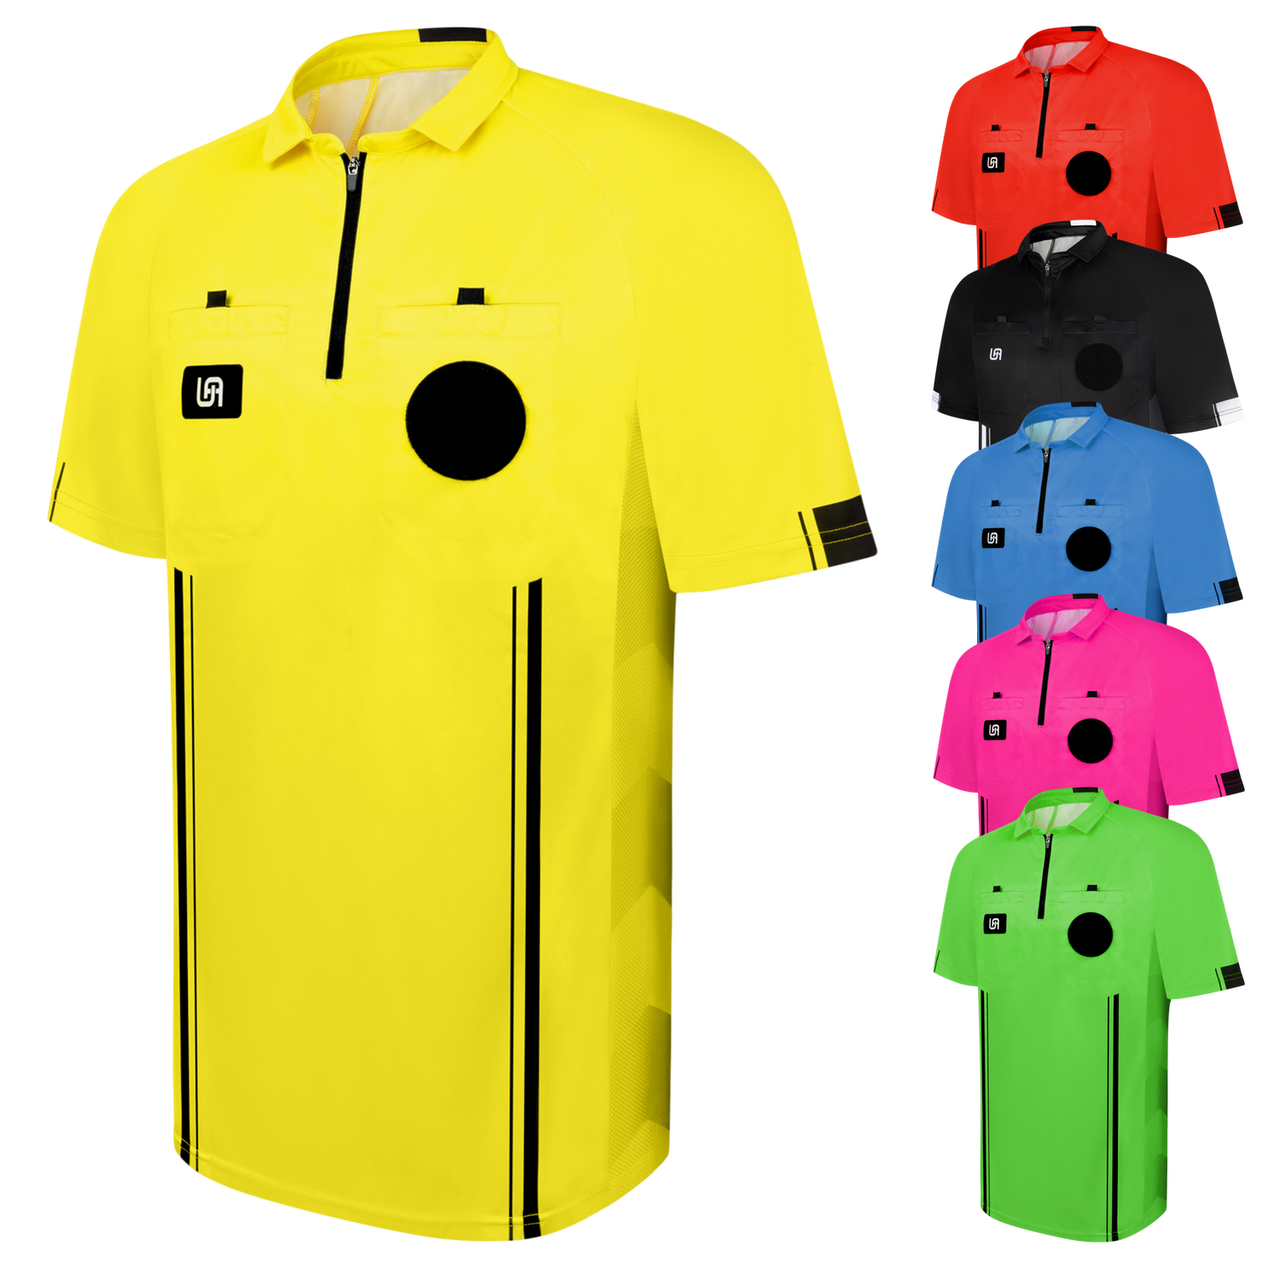 Umpire Equipment and Clothing  Referee Gear and Uniforms 